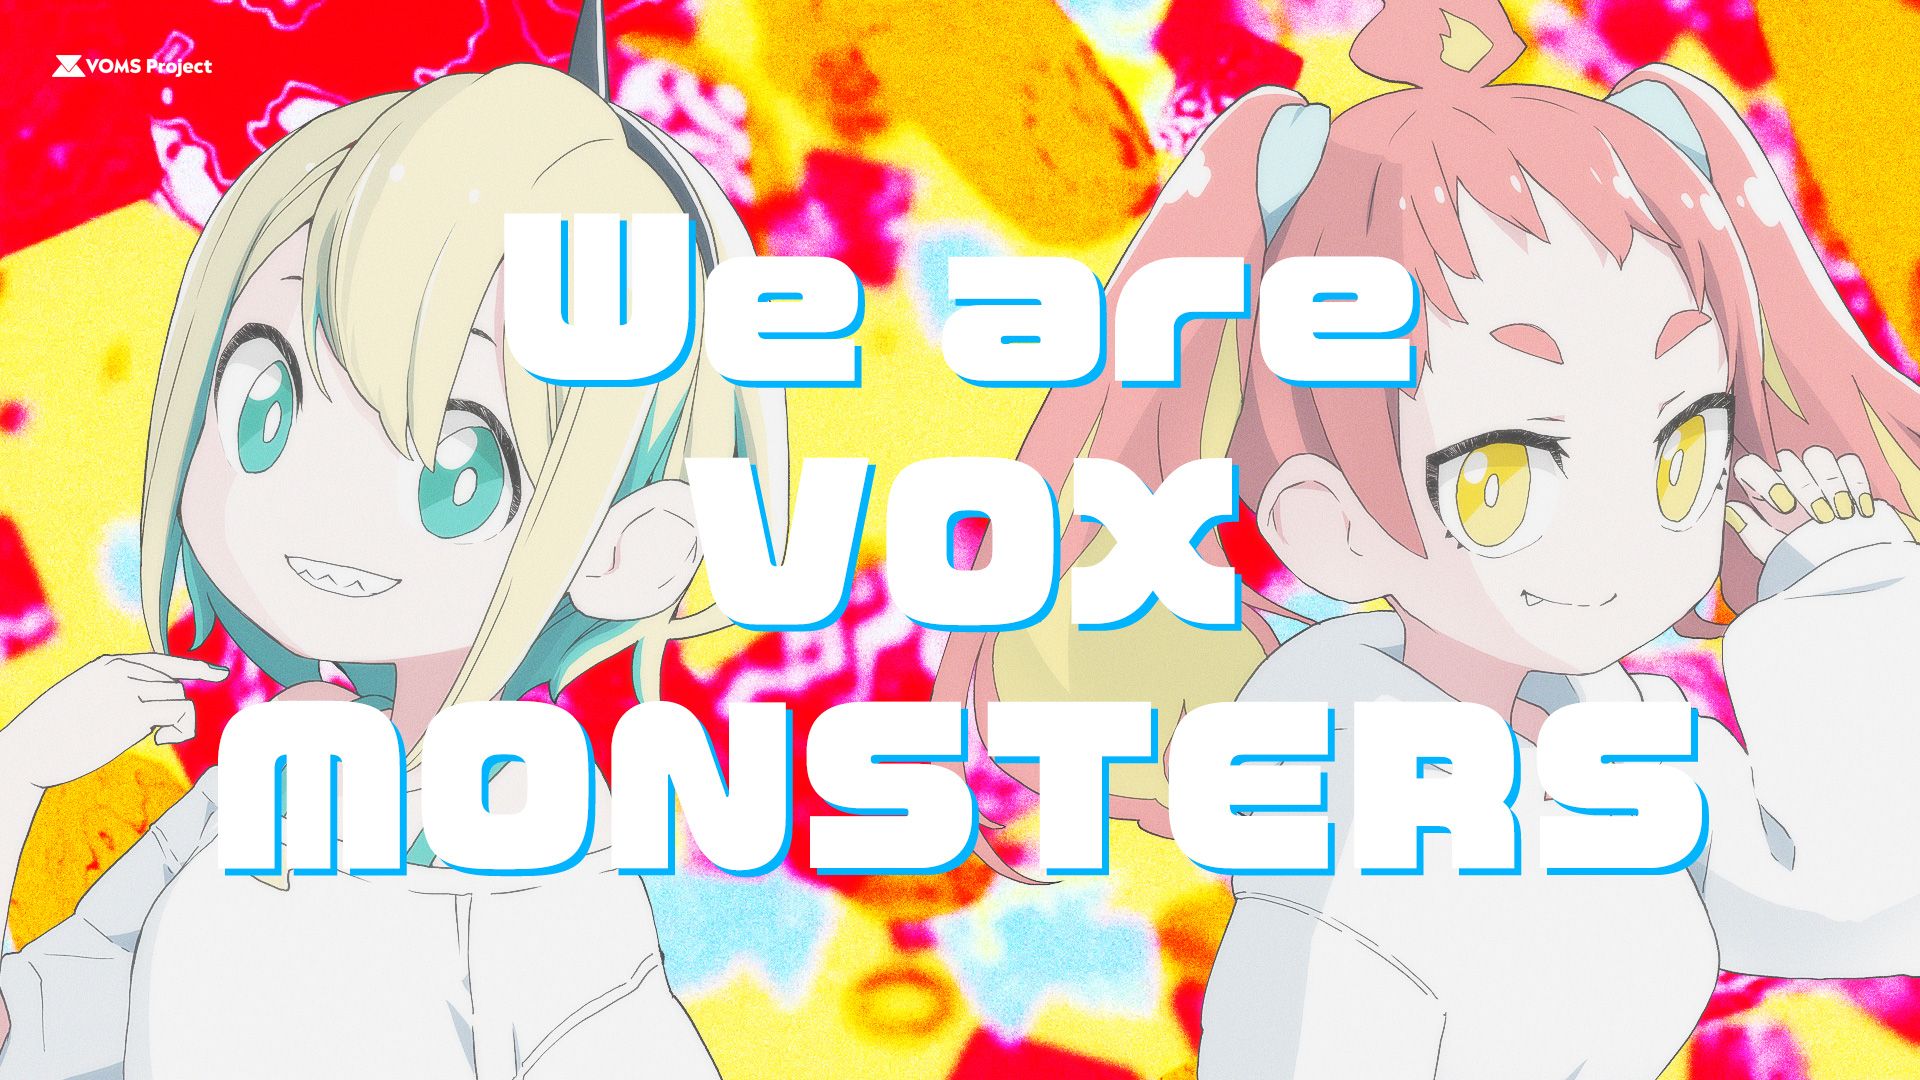 VOMS Project「We are VOX MONSTERS」MVを制作！